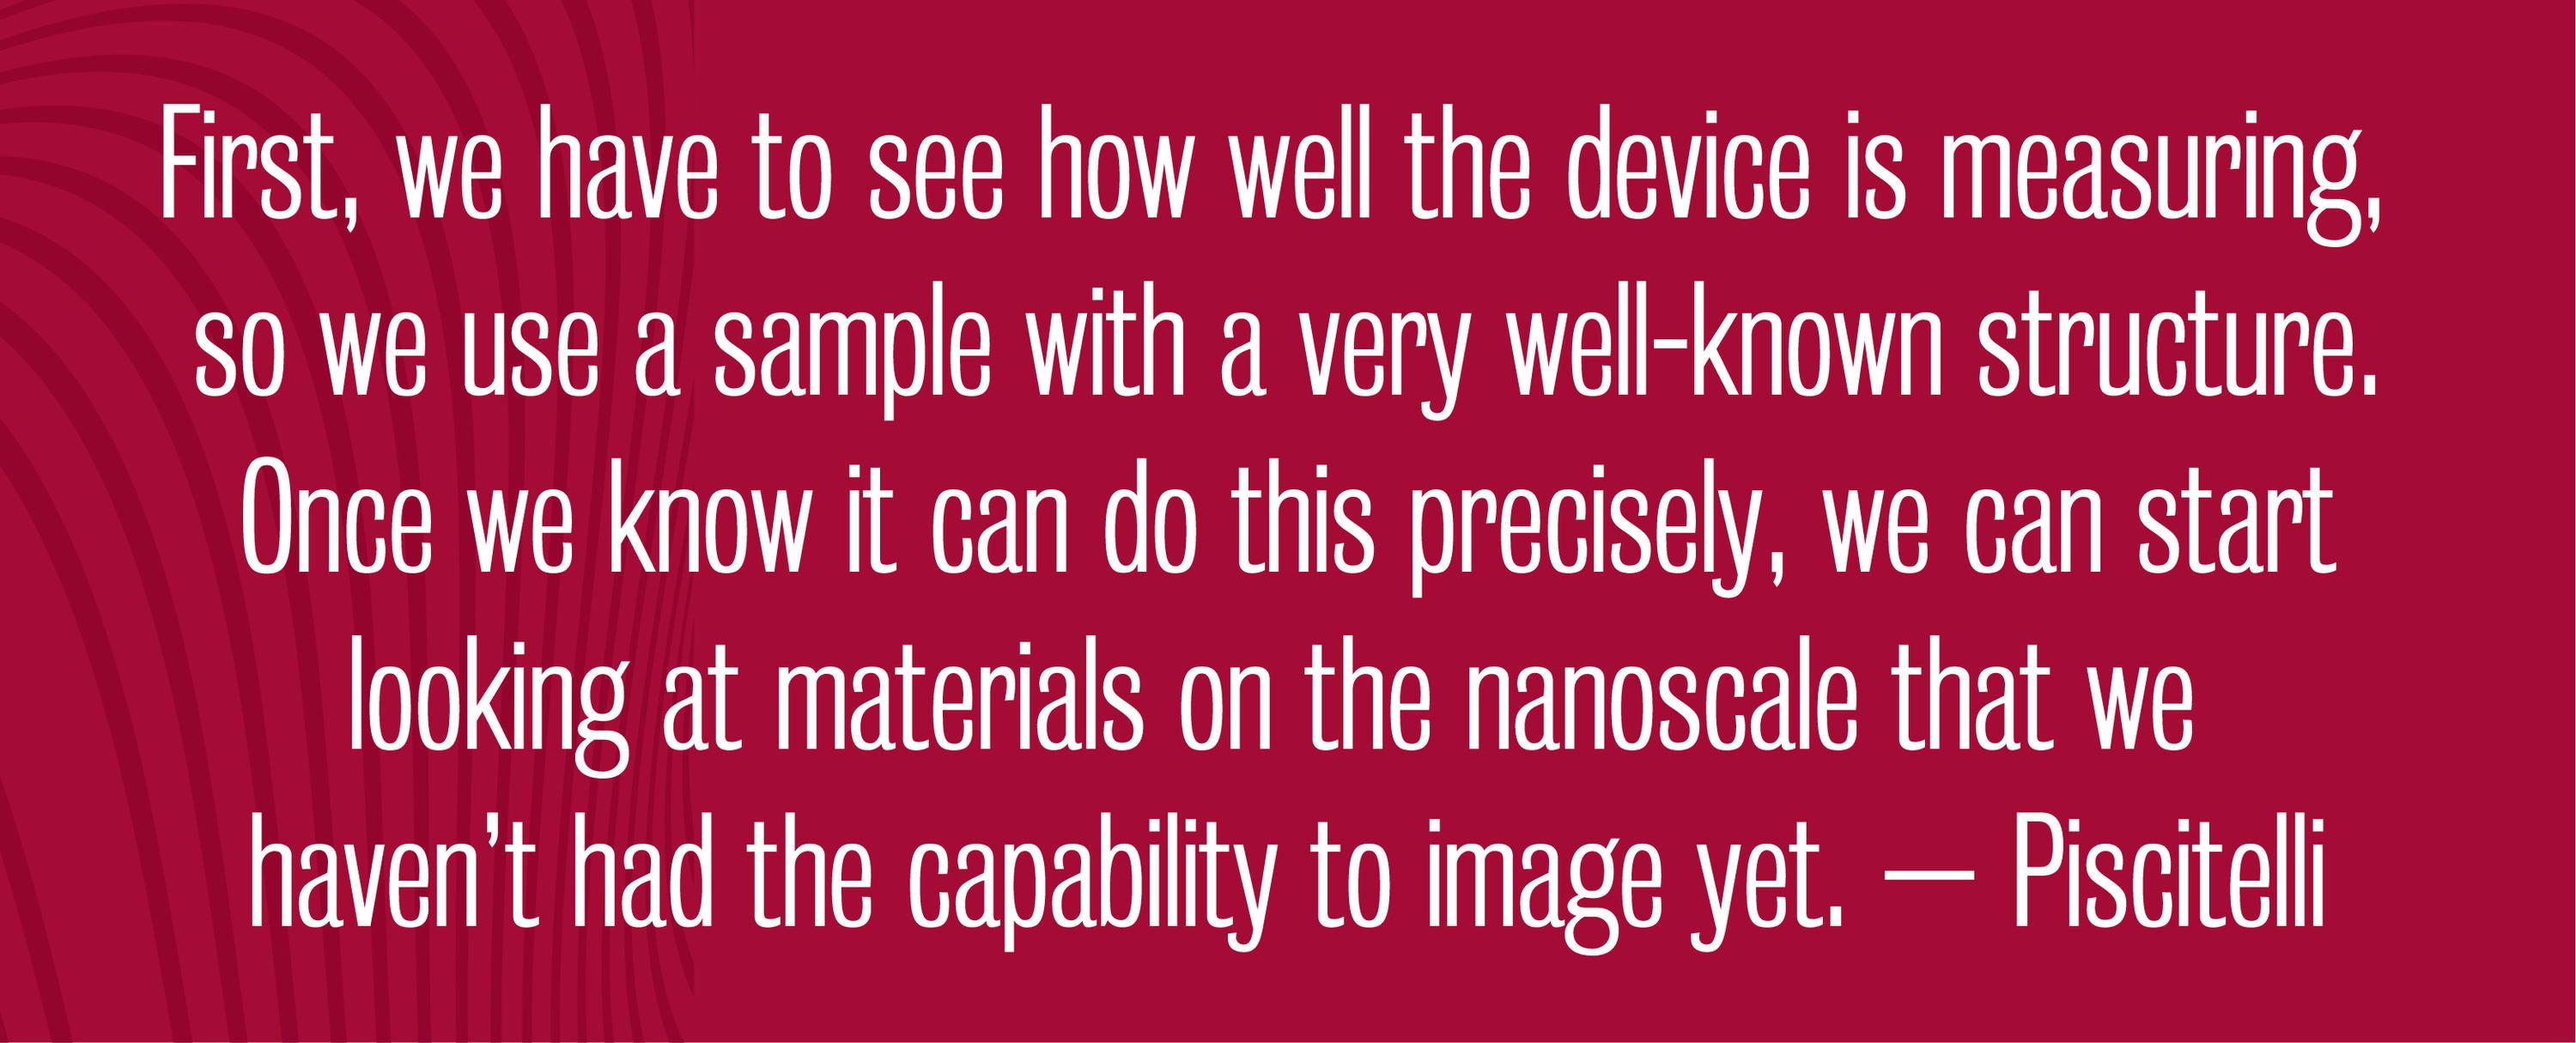 &quot;First, we have to see how well the device is measuring, so we use a sample with a very well-known structure. Once we know it can do this precisely, we can start looking at materials on the nanoscale that we have't had the capability to image yet.&quot; – Piscitelli